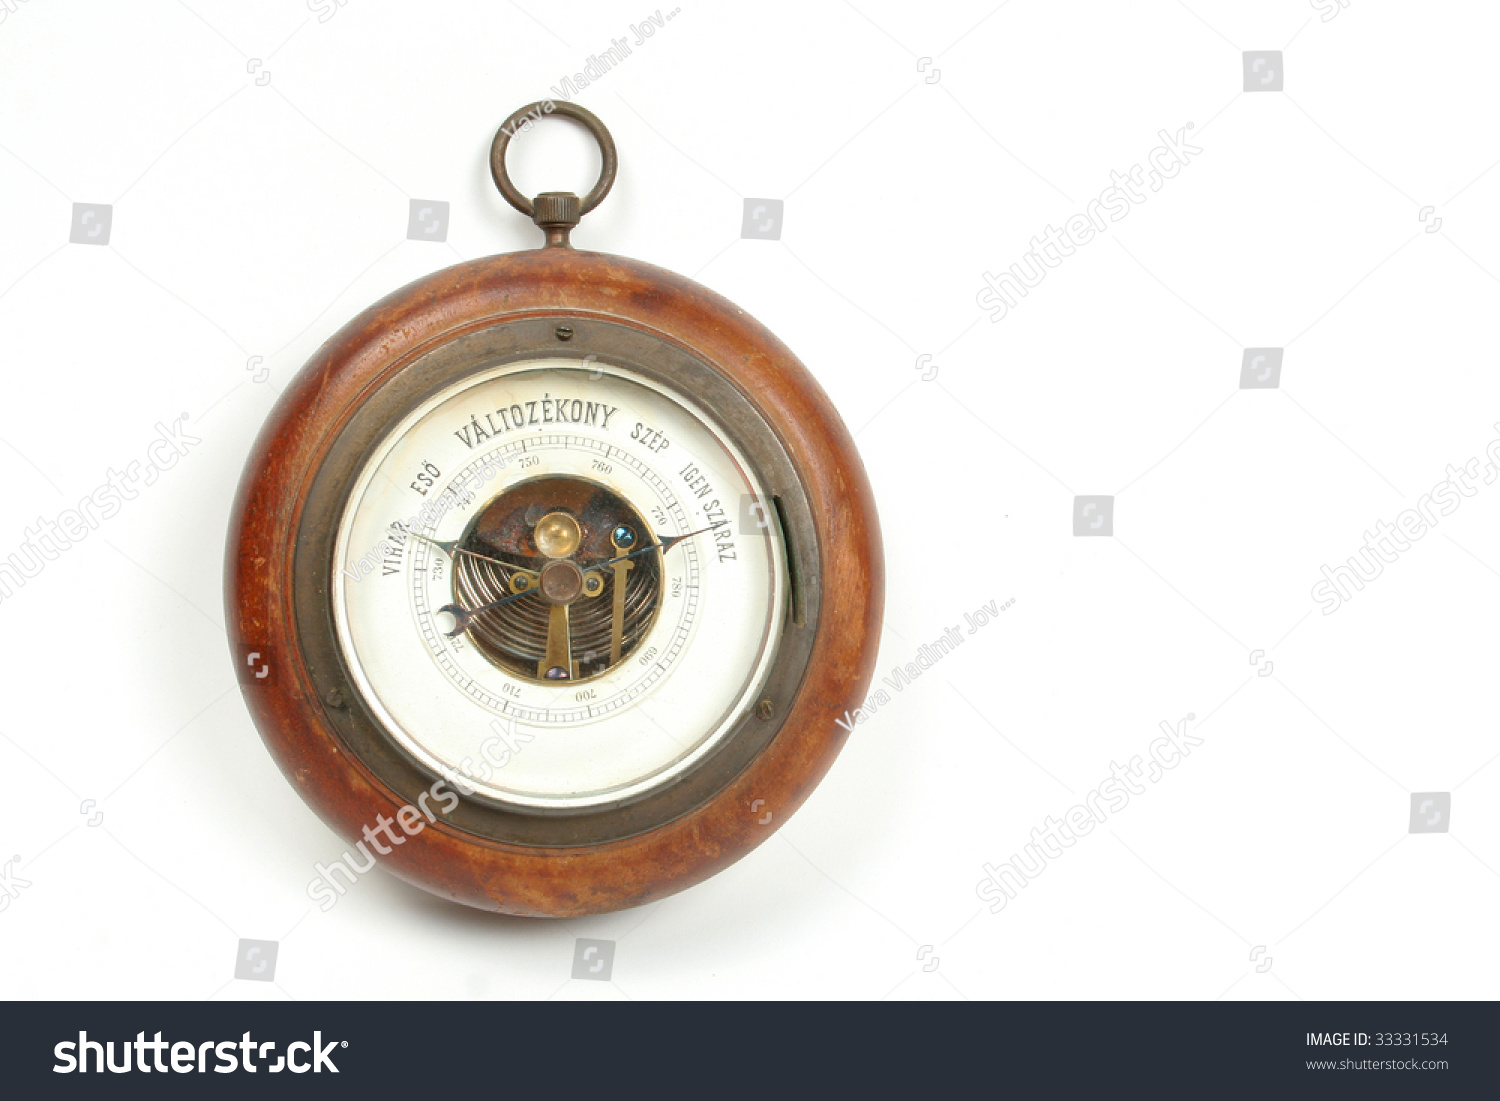 Old vintage Hungarian barometer isolated on white background #33331534